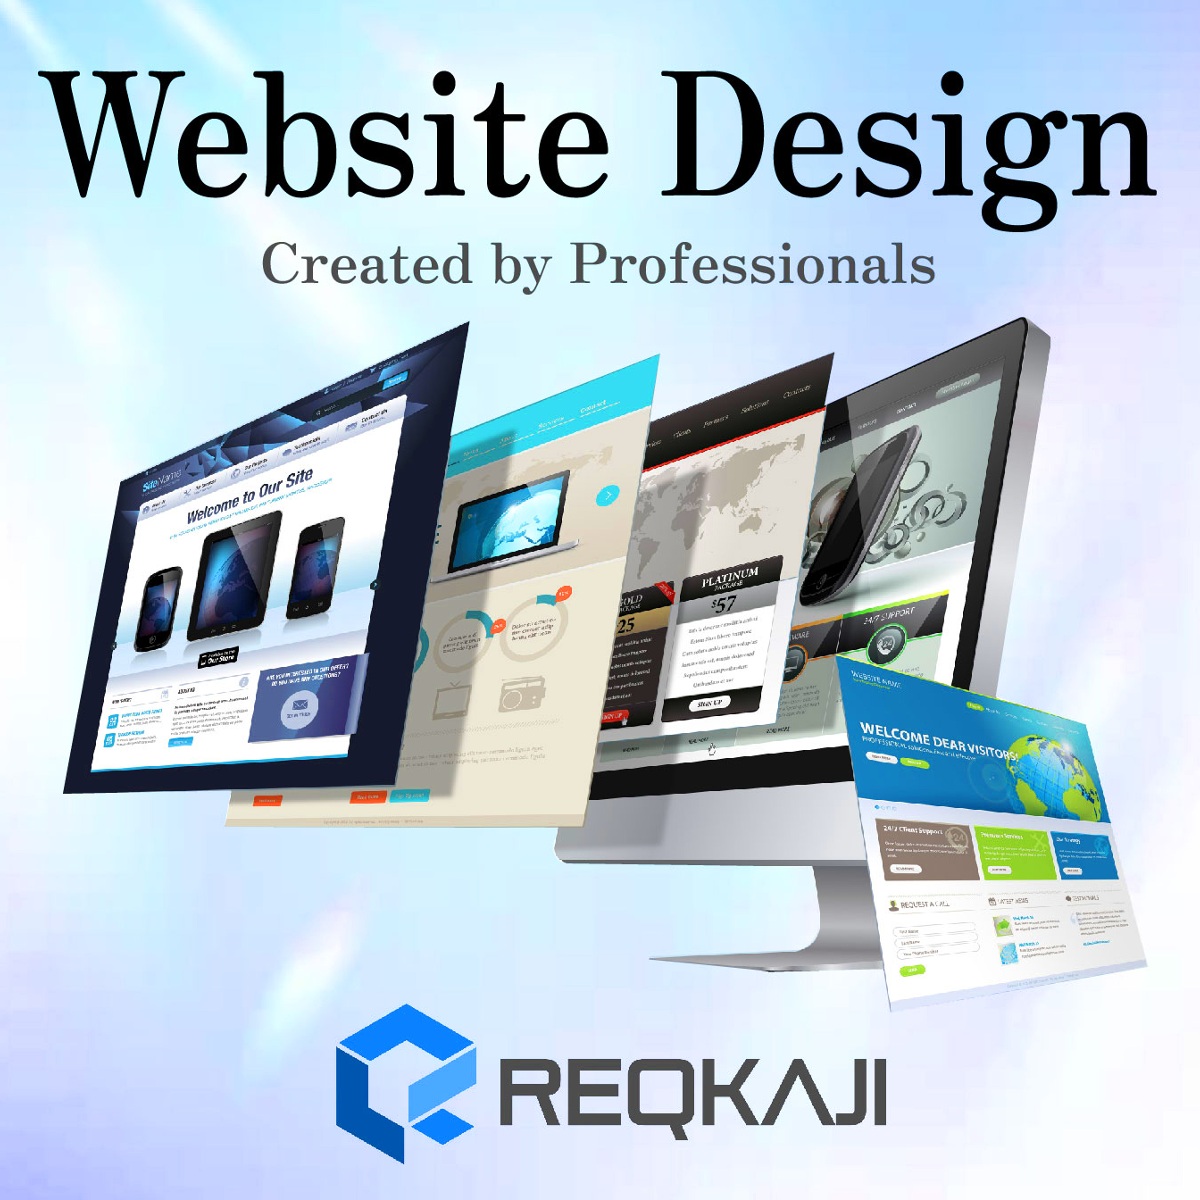 We create SEO-specific websites (HP) that are strong in attracting customers.